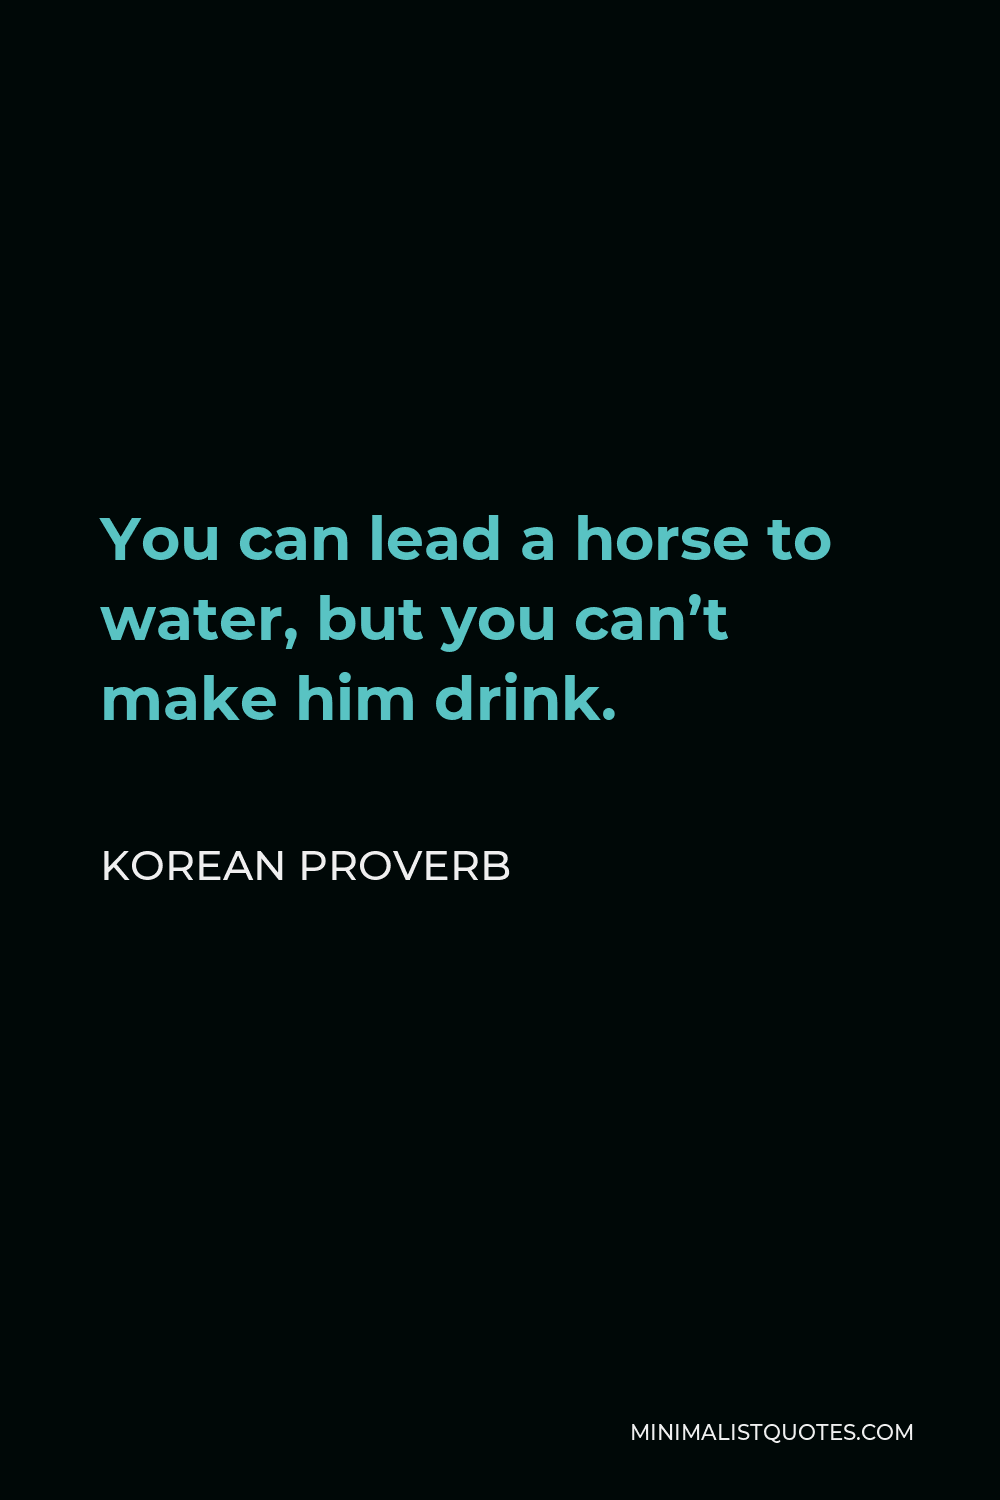 Korean Proverb Quote - You can lead a horse to water, but you can’t make him drink.